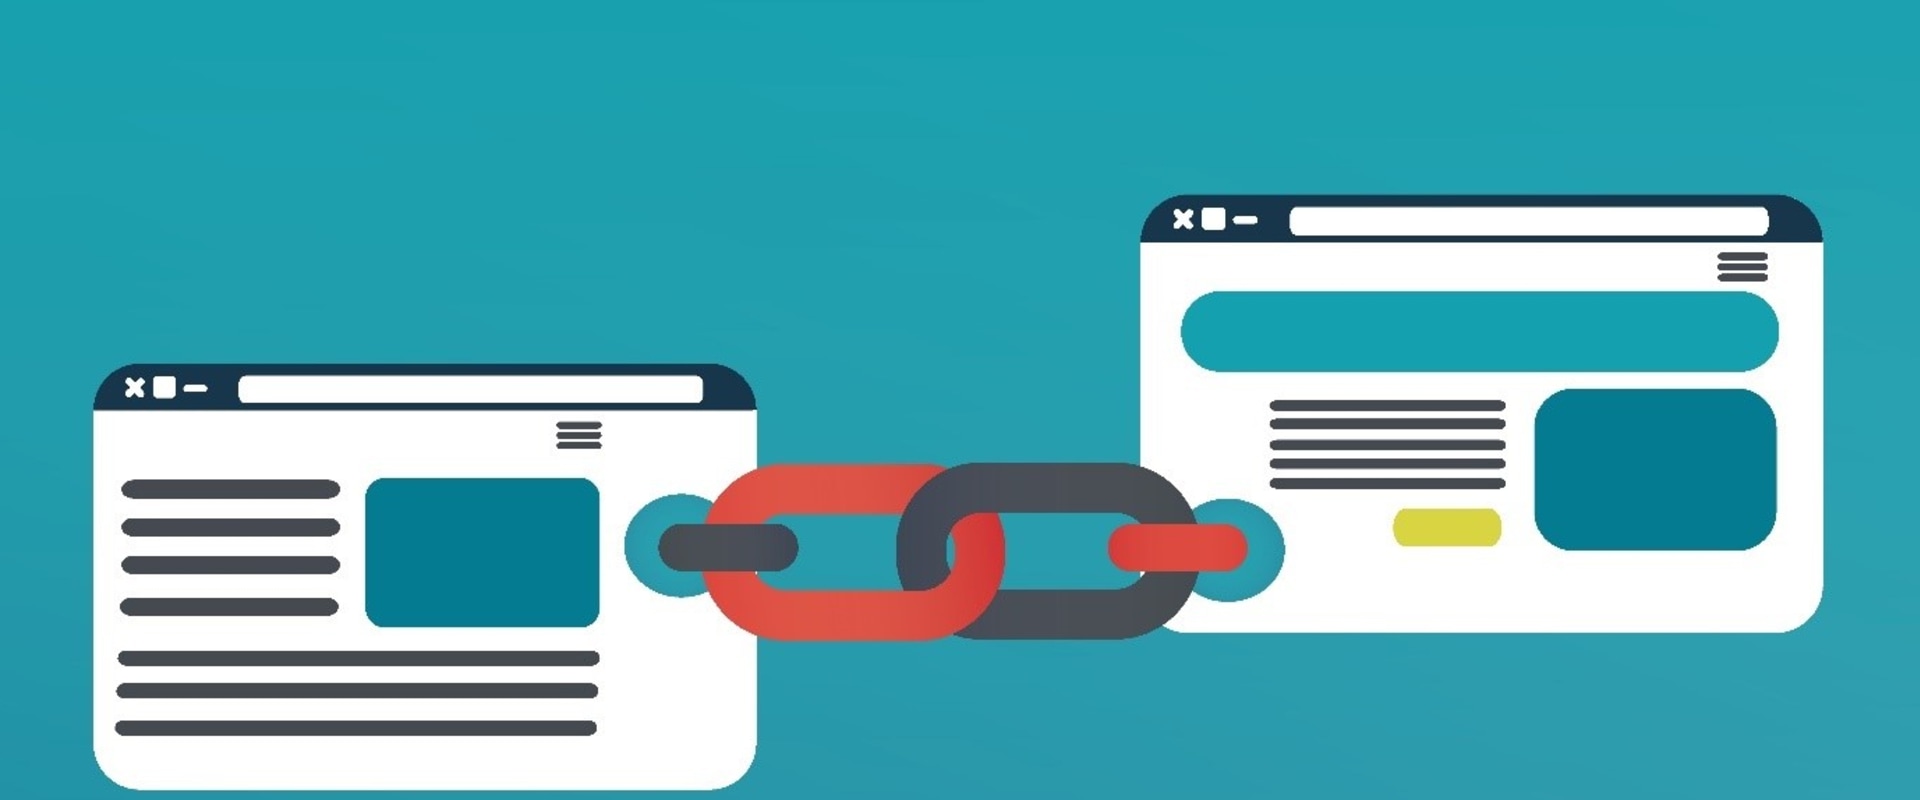 Can you do seo without backlinks?